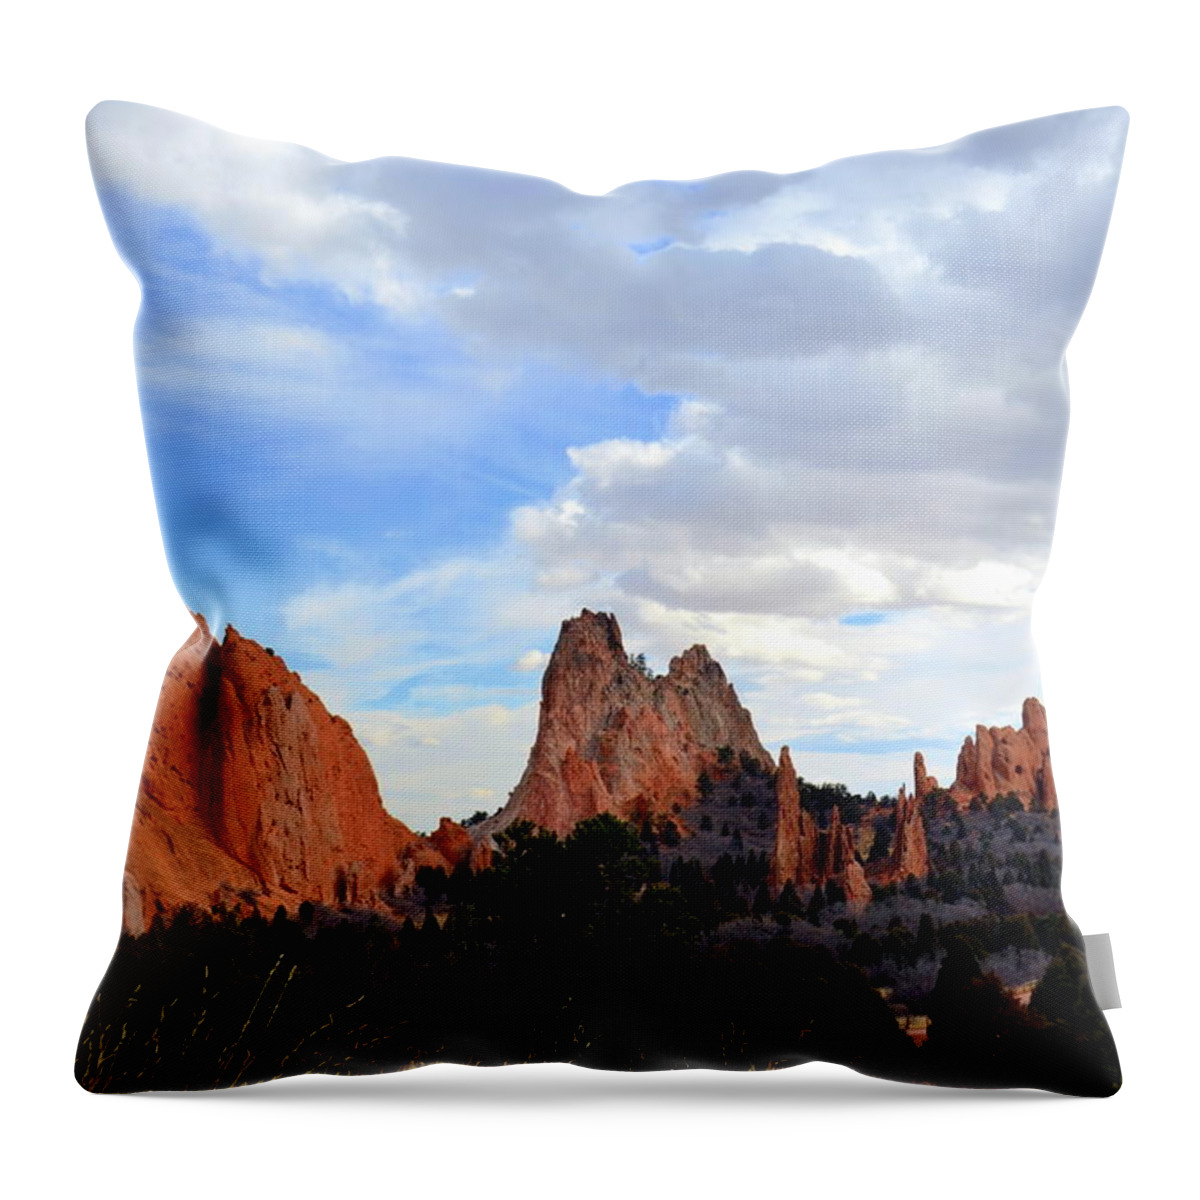 Peaceful Day In Garden Of The Gods Throw Pillow featuring the photograph Peaceful Day In Garden Of The Gods by Clarice Lakota